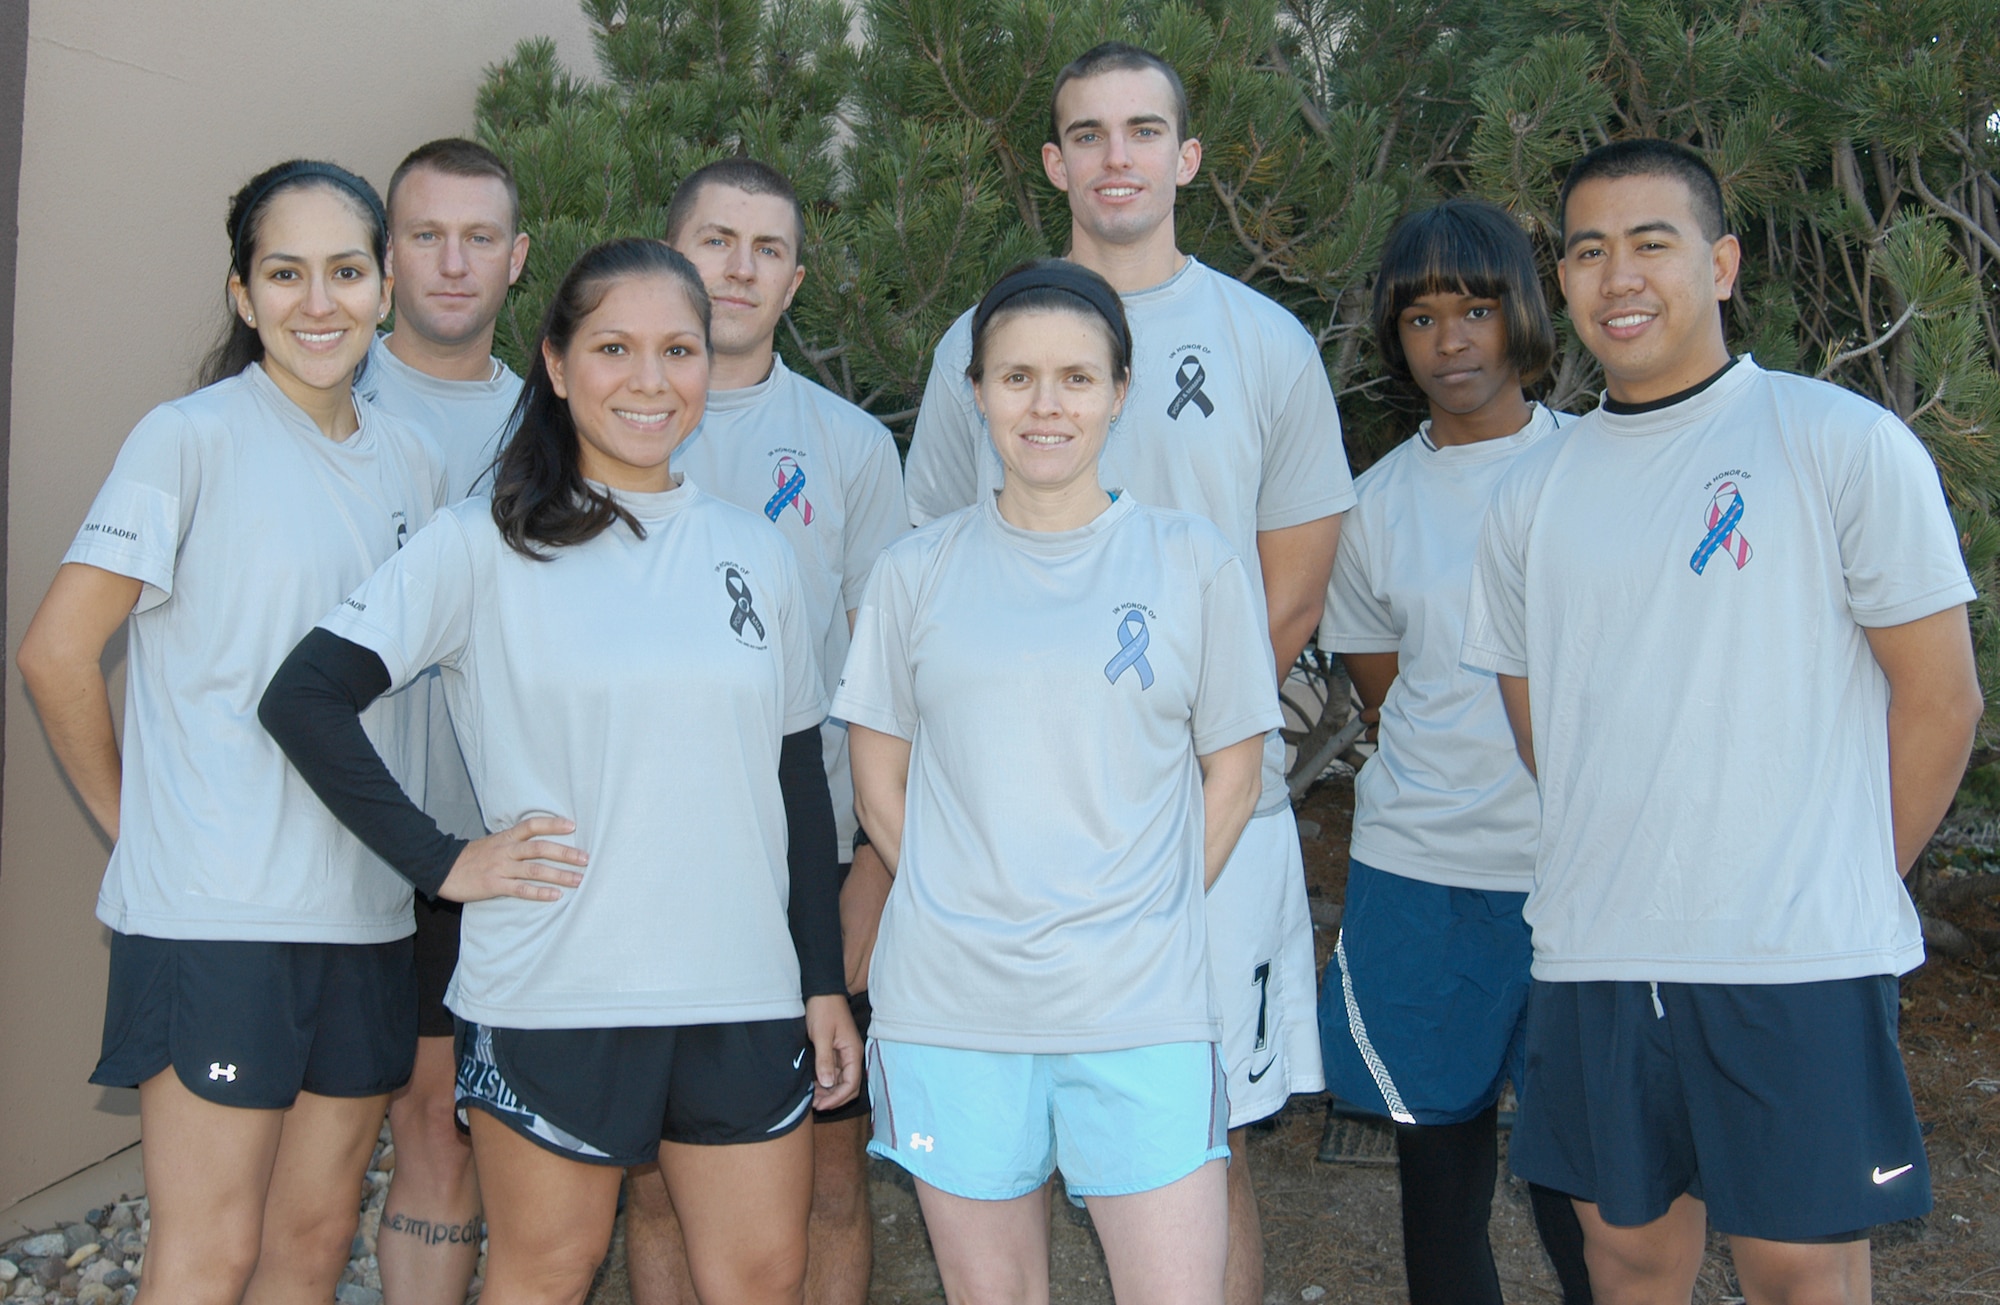 Members of the 55th Force Support Squadron marathon running team pose for a group photo Oct. 8, 2010, outside the field house at Offutt Air Force Base, Neb. The team is training to run the Rock 'n' Roll San Antonio Marathon on Nov. 14, 2010. (U.S. Air Force photo/Staff Sgt. James M. Hodgman)